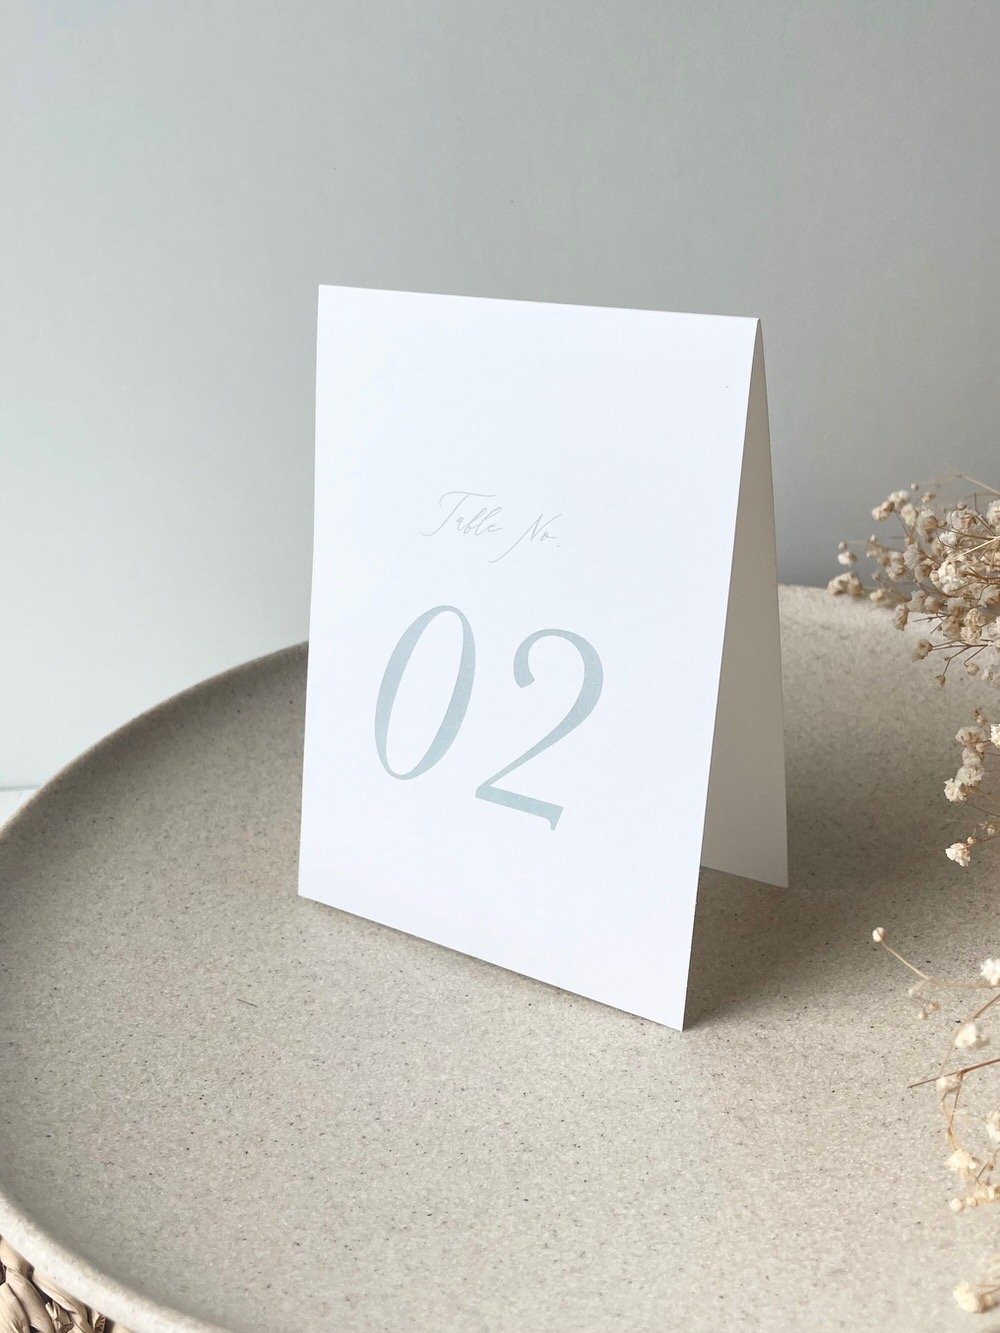 Just My Type Wedding Invitation Stationery NZ Wedding Menu Place Name Table Number3162.jpg